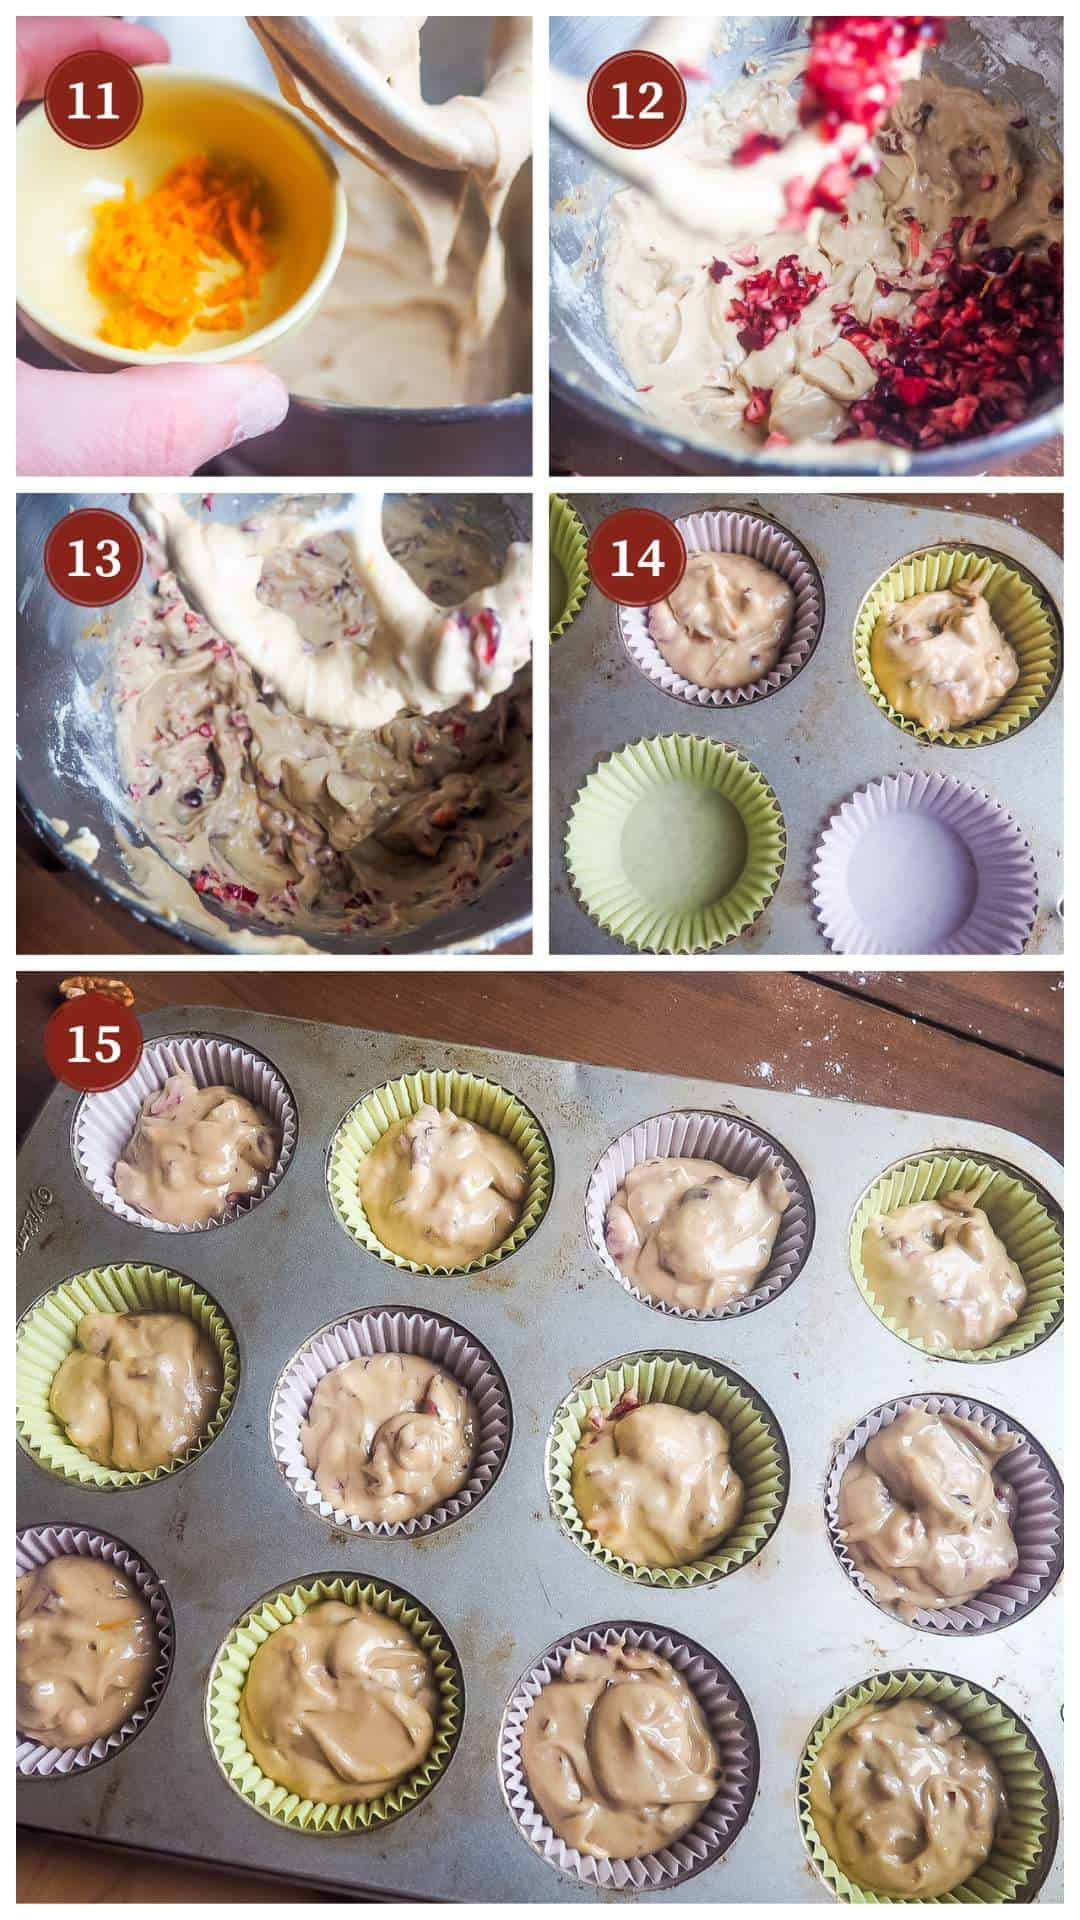 A collage of images showing how to make cranberry, orange, and pecan muffins, steps 11 - 15.